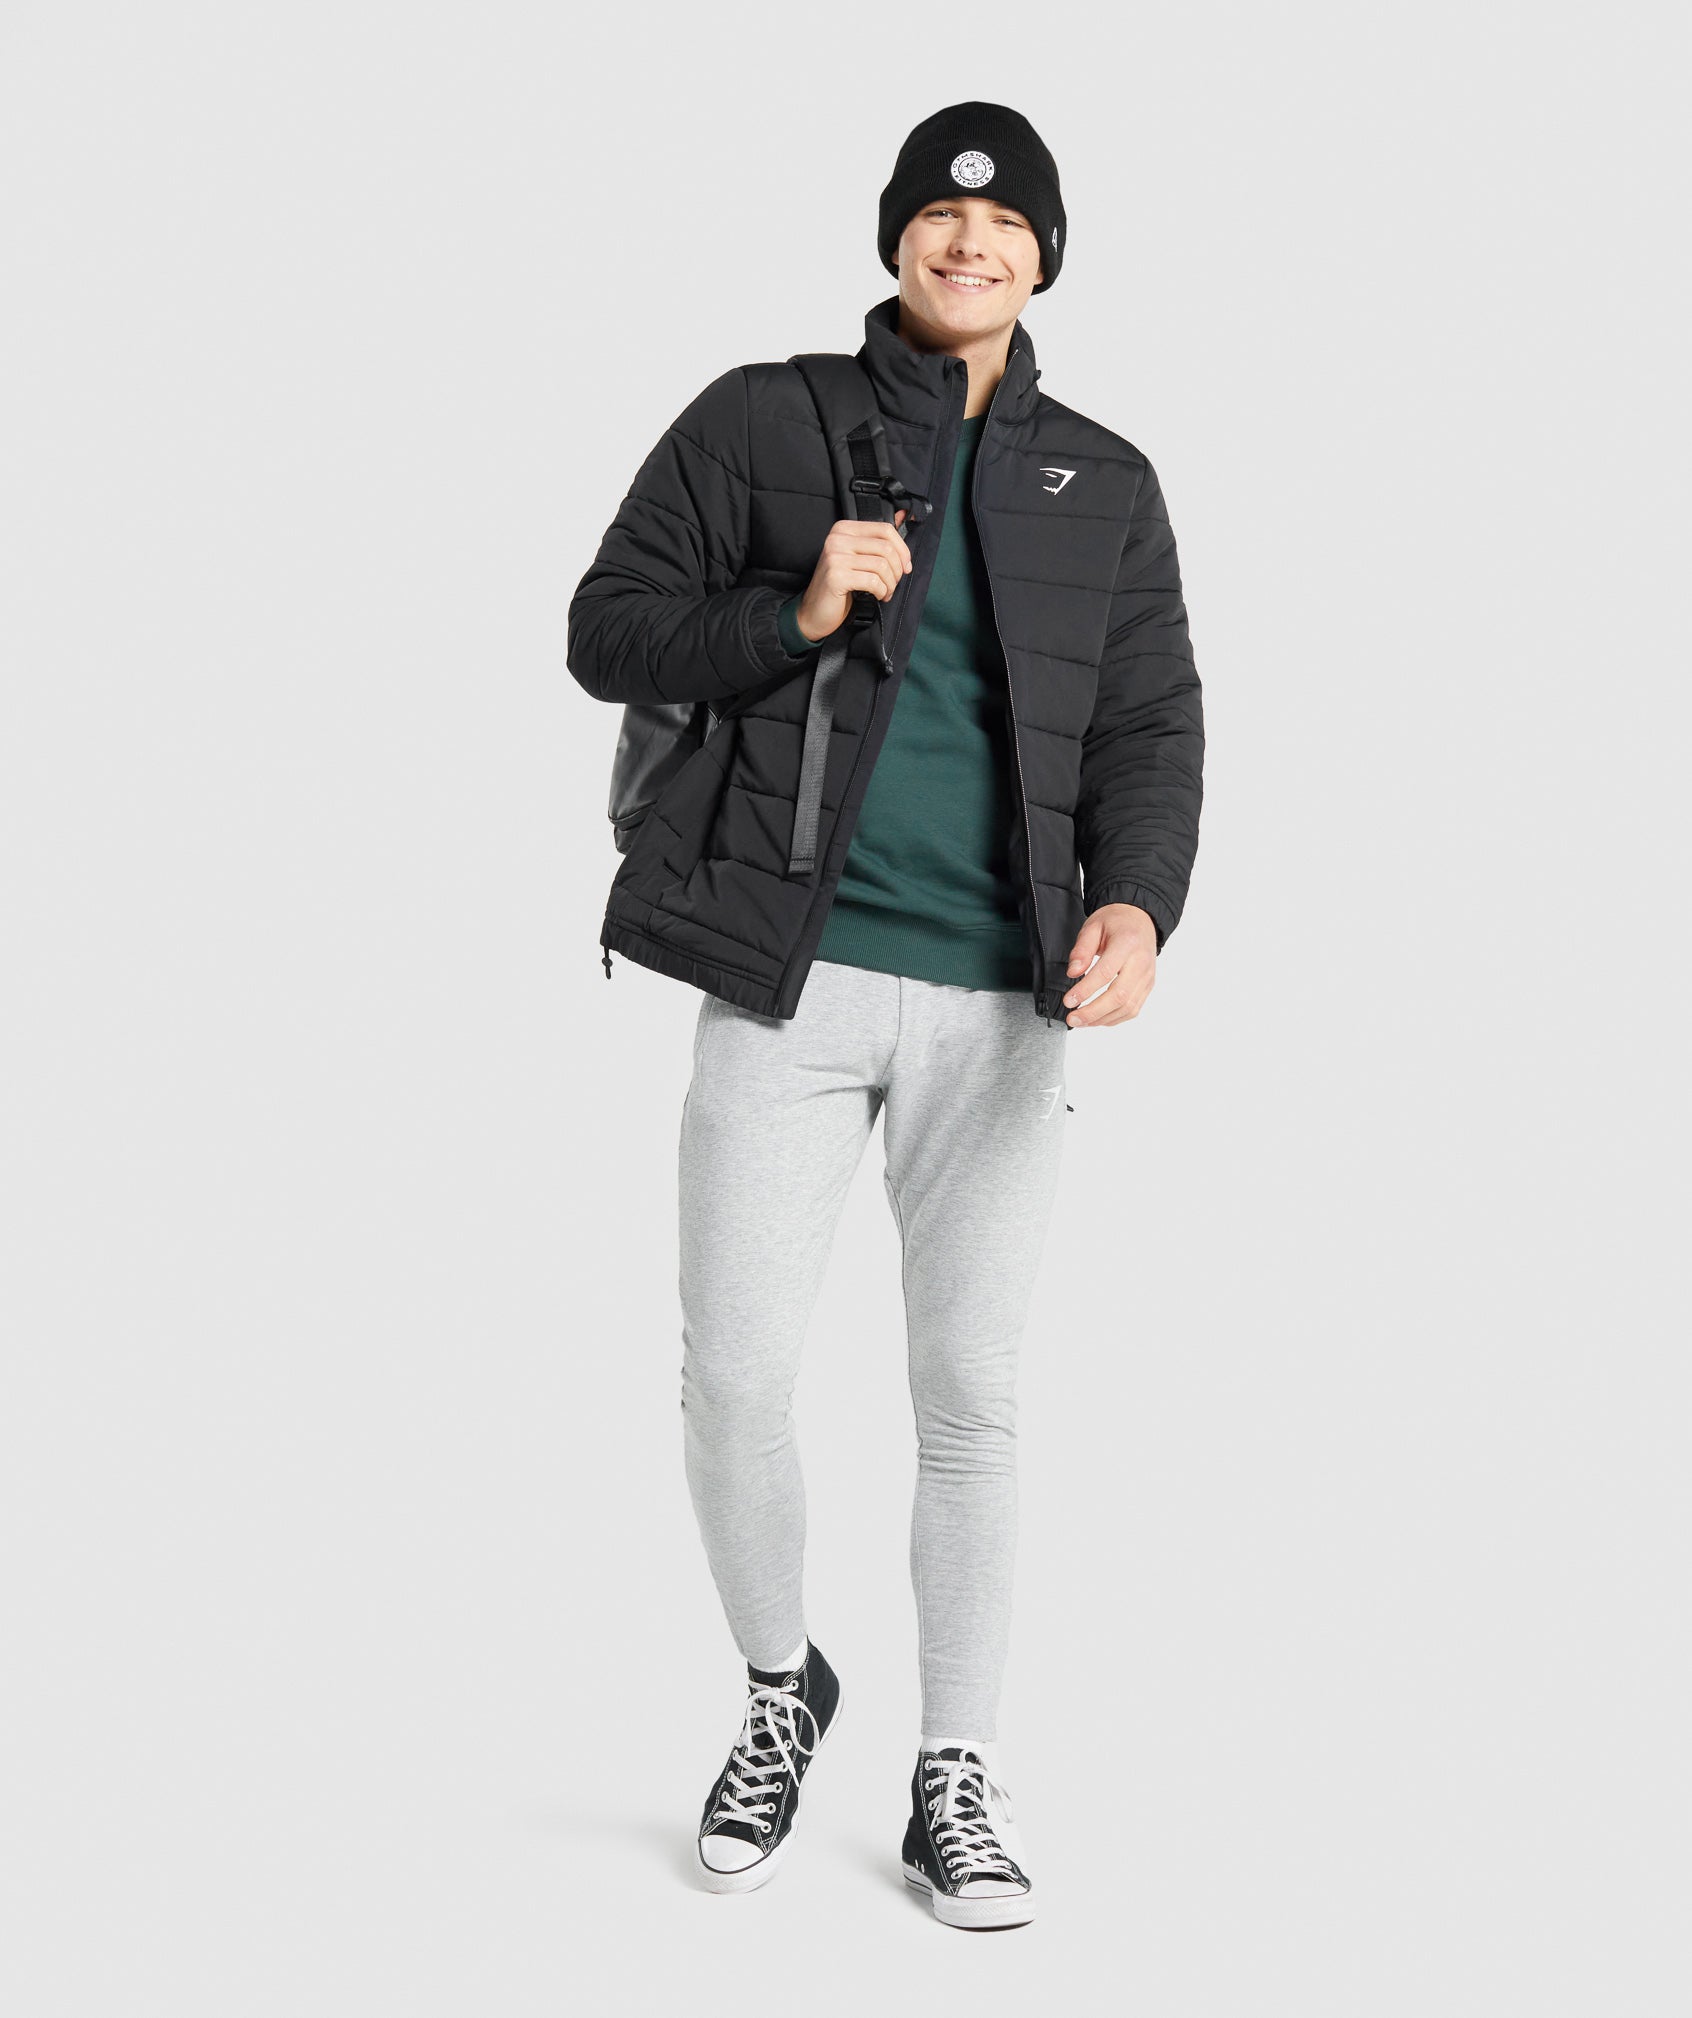 Crest Padded Jacket in Black - view 5